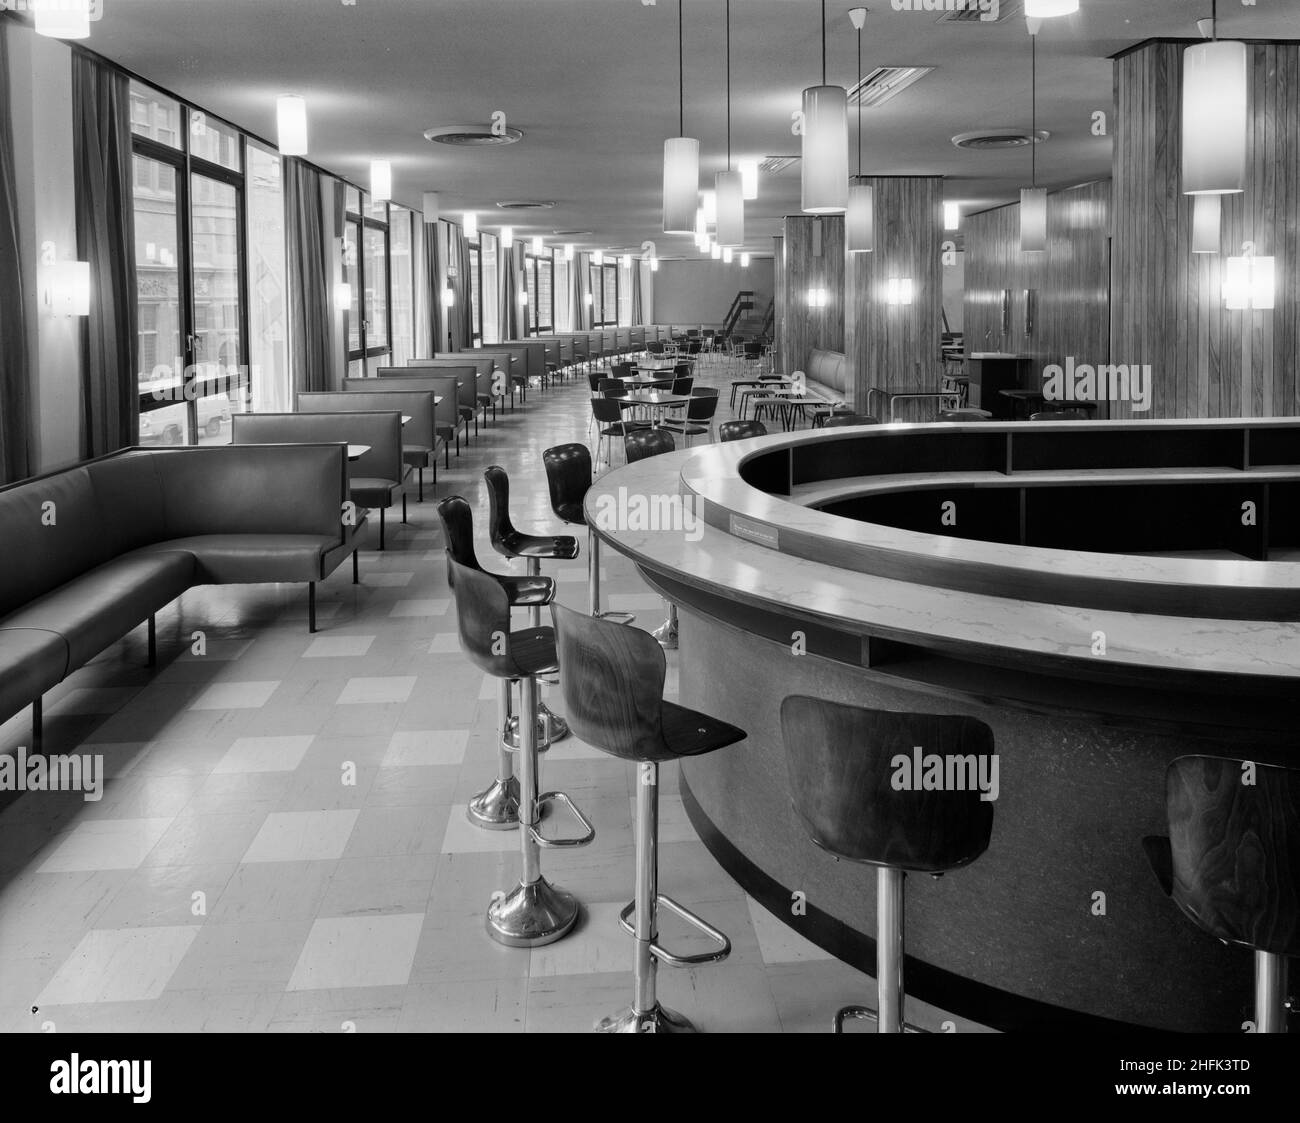 Paternoster Square, City of London, 23/06/1965. A view of tables and seating in an empty restaurant at the Paternoster development. Work on the Paternoster development was carried out in a joint venture by John Laing Construction Limited, Trollope and Colls Limited, and George Wimpey and Company Limited. The scheme involved the redevelopment of a seven acre site on the north side of St Paul&#x2019;s Cathedral. The site had been almost entirely devastated during an incendiary raid in December 1940. The development consisted of a series of office blocks, a shopping precinct, an extensive piazza Stock Photo